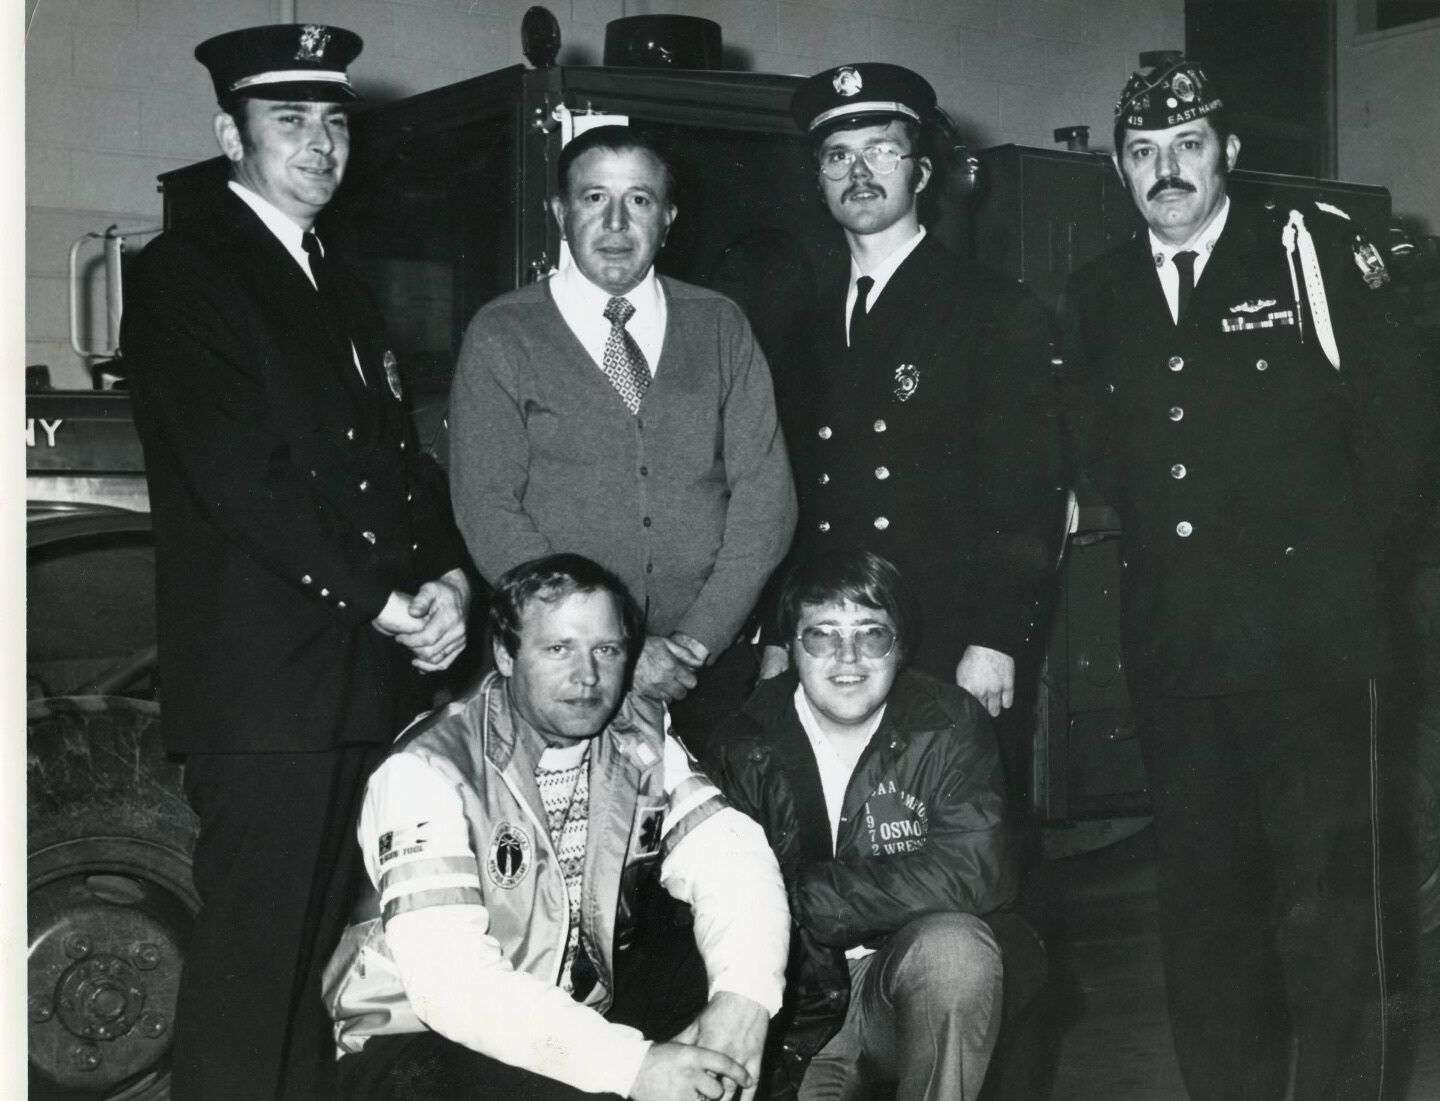 Montauk Fire Department volunteers who were dispatched to Buffalo in 1977 were honored by the American Legion for their service. Pictured are, in the back row from left, Frank Ward, MFD Chief Larry Franzone, John Lakeman and American Legion Commander Ralph George and in the front row, Ron Ostoff, left, and Peter Joyce Sr.